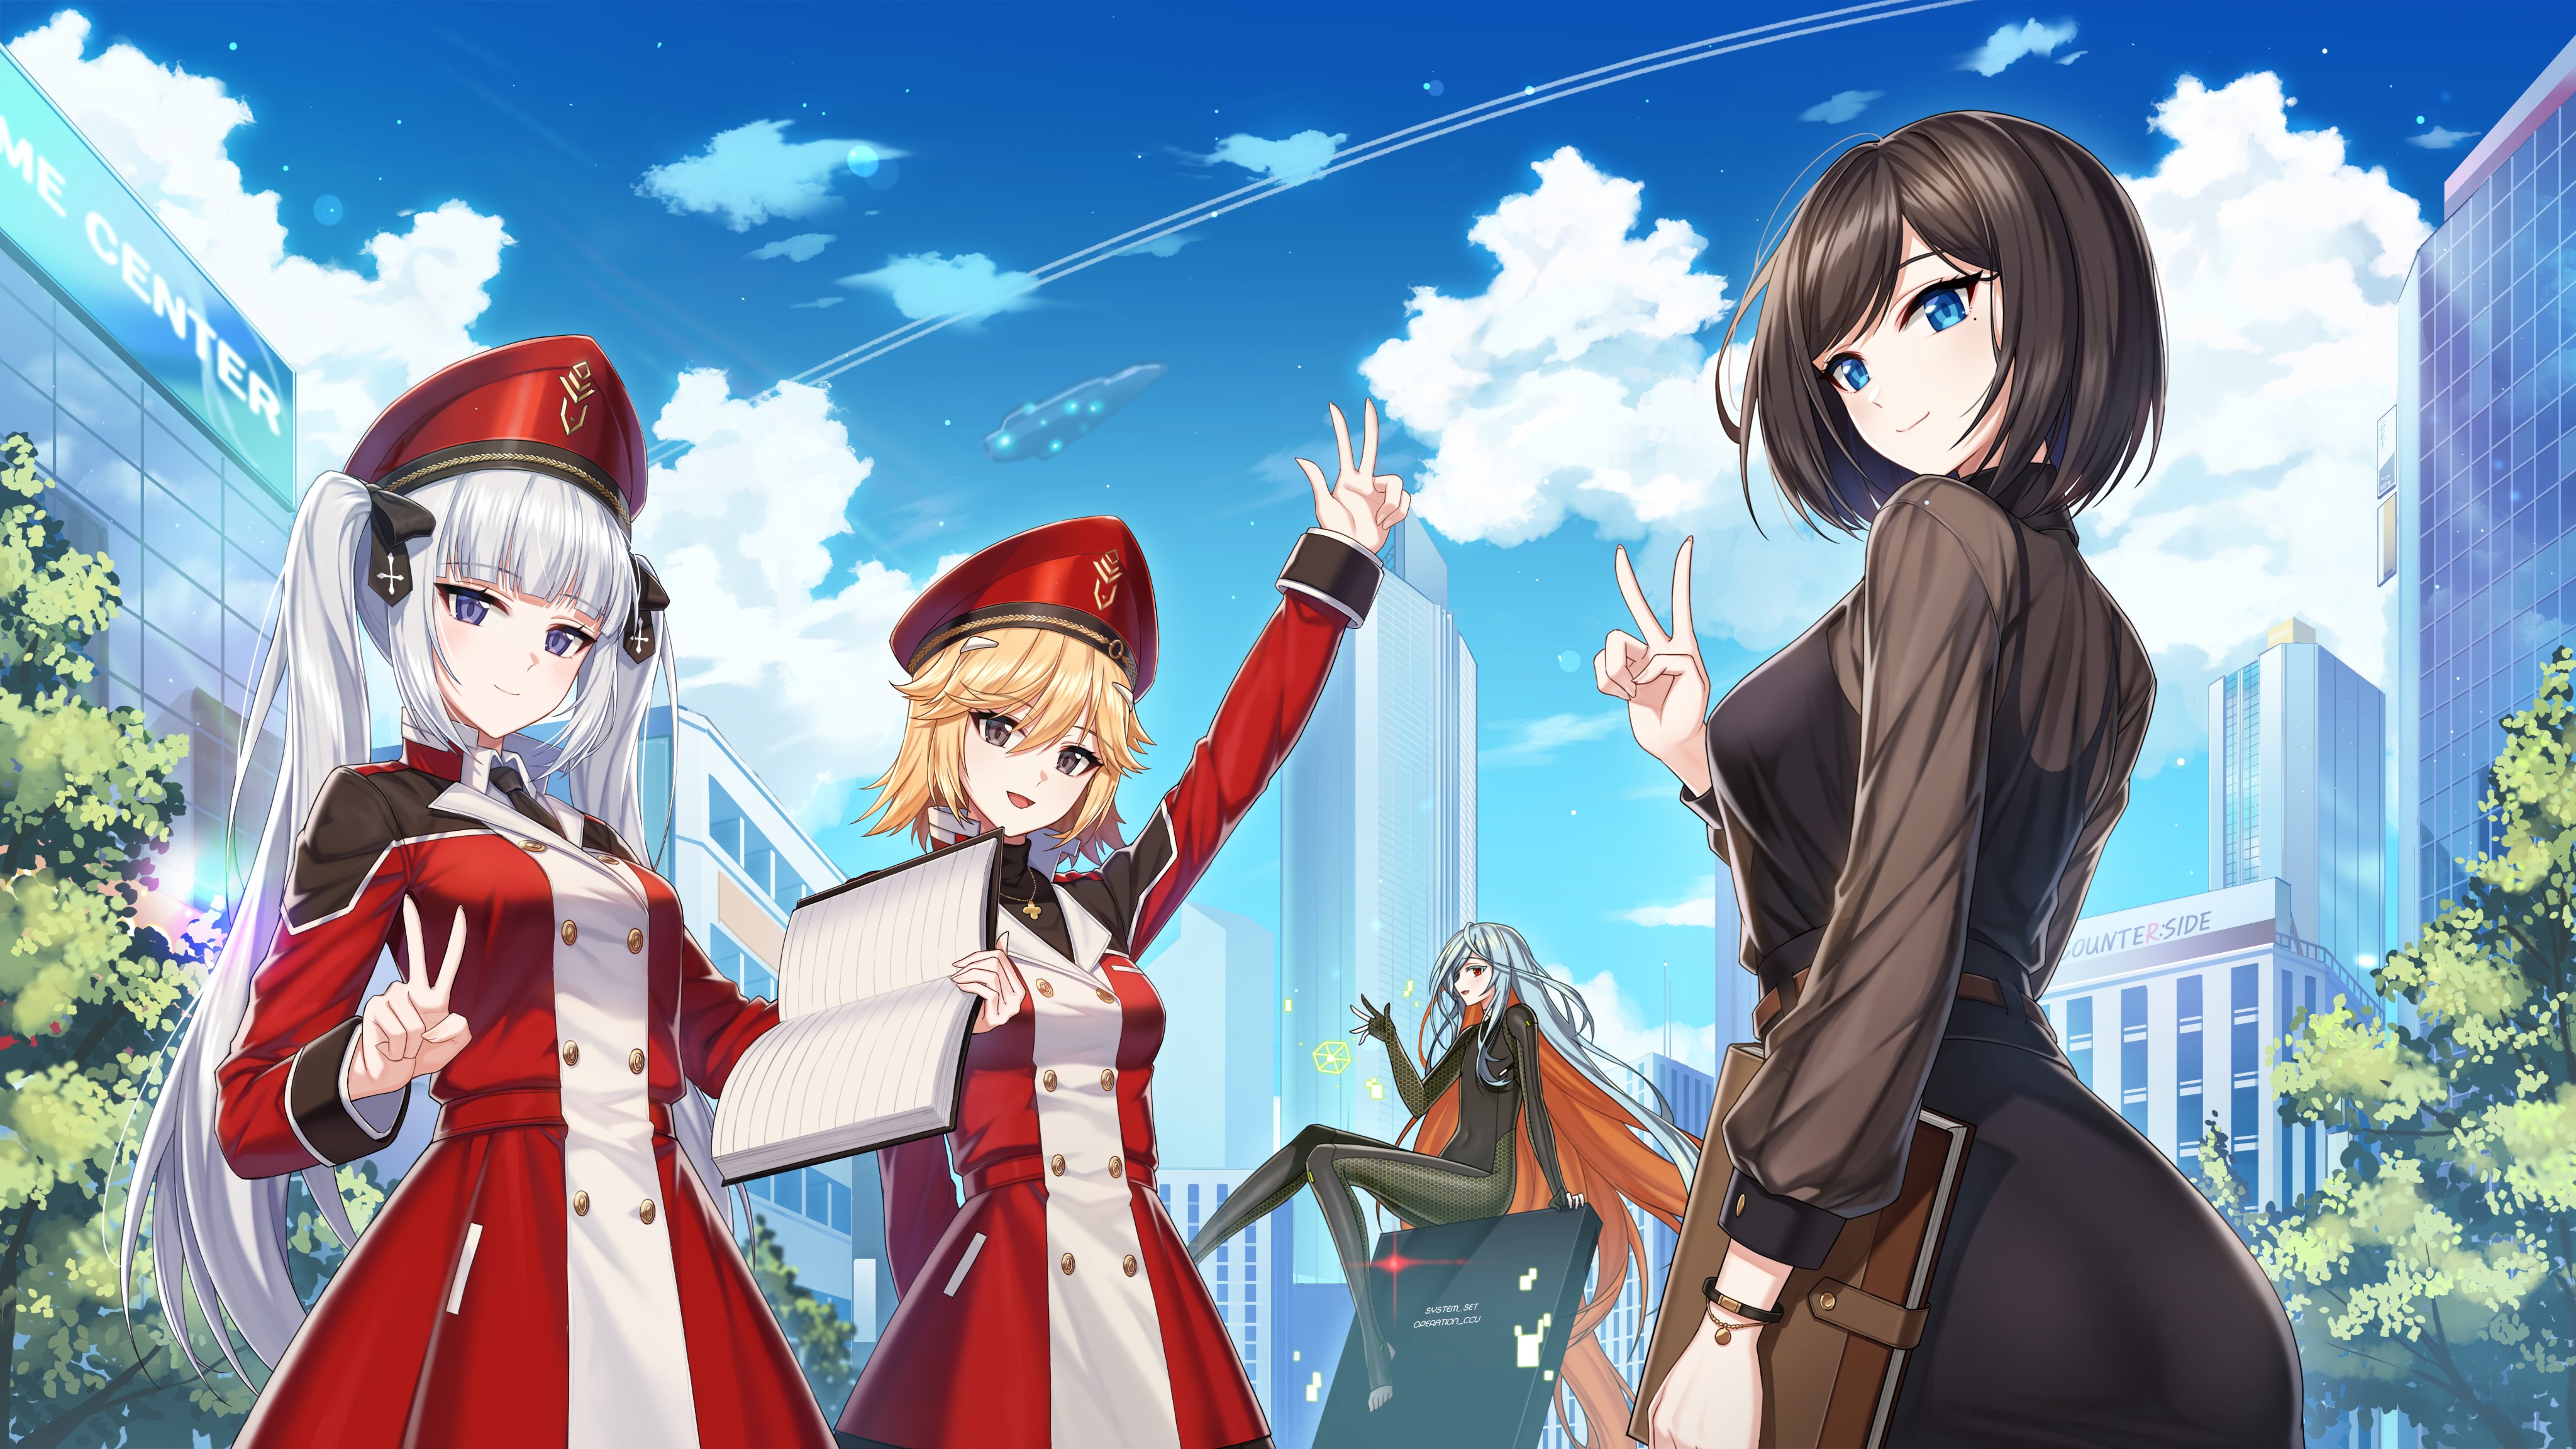 Anime Anime Girls Arms Up Victory Sign Hand Gesture Hat Blue Eyes Brunette 4096x2304